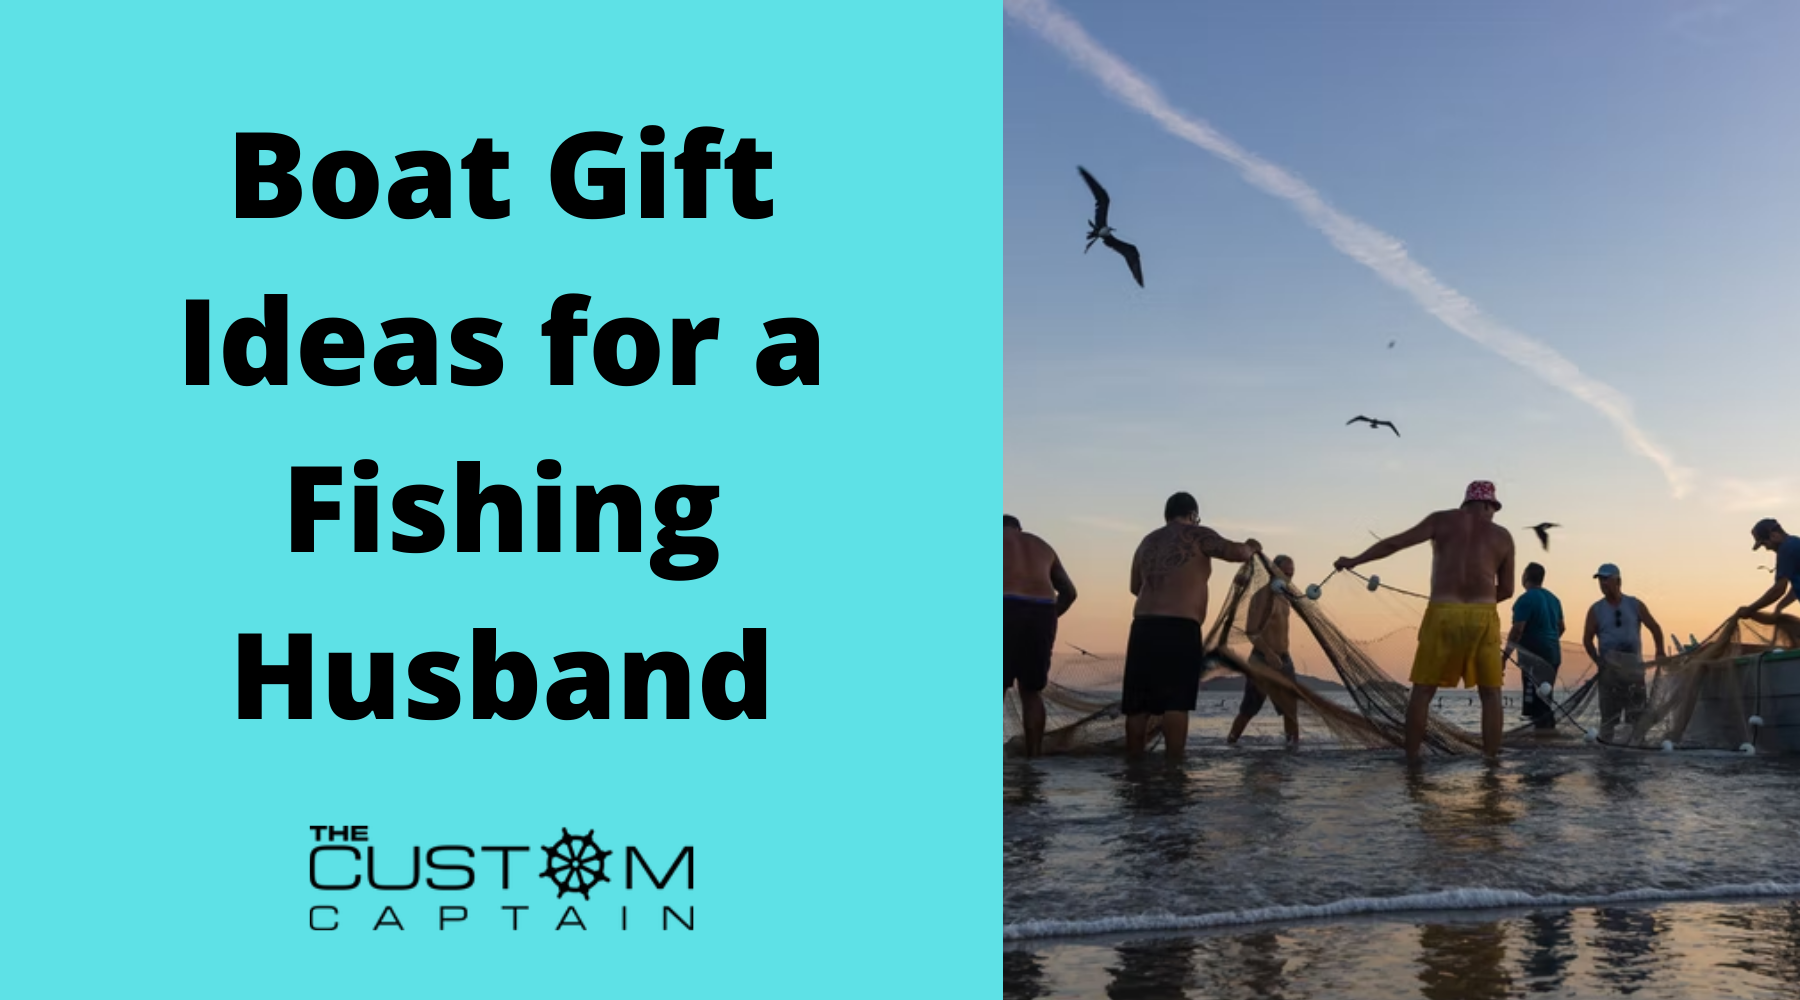 Boat Gift Ideas for a Fishing Husband